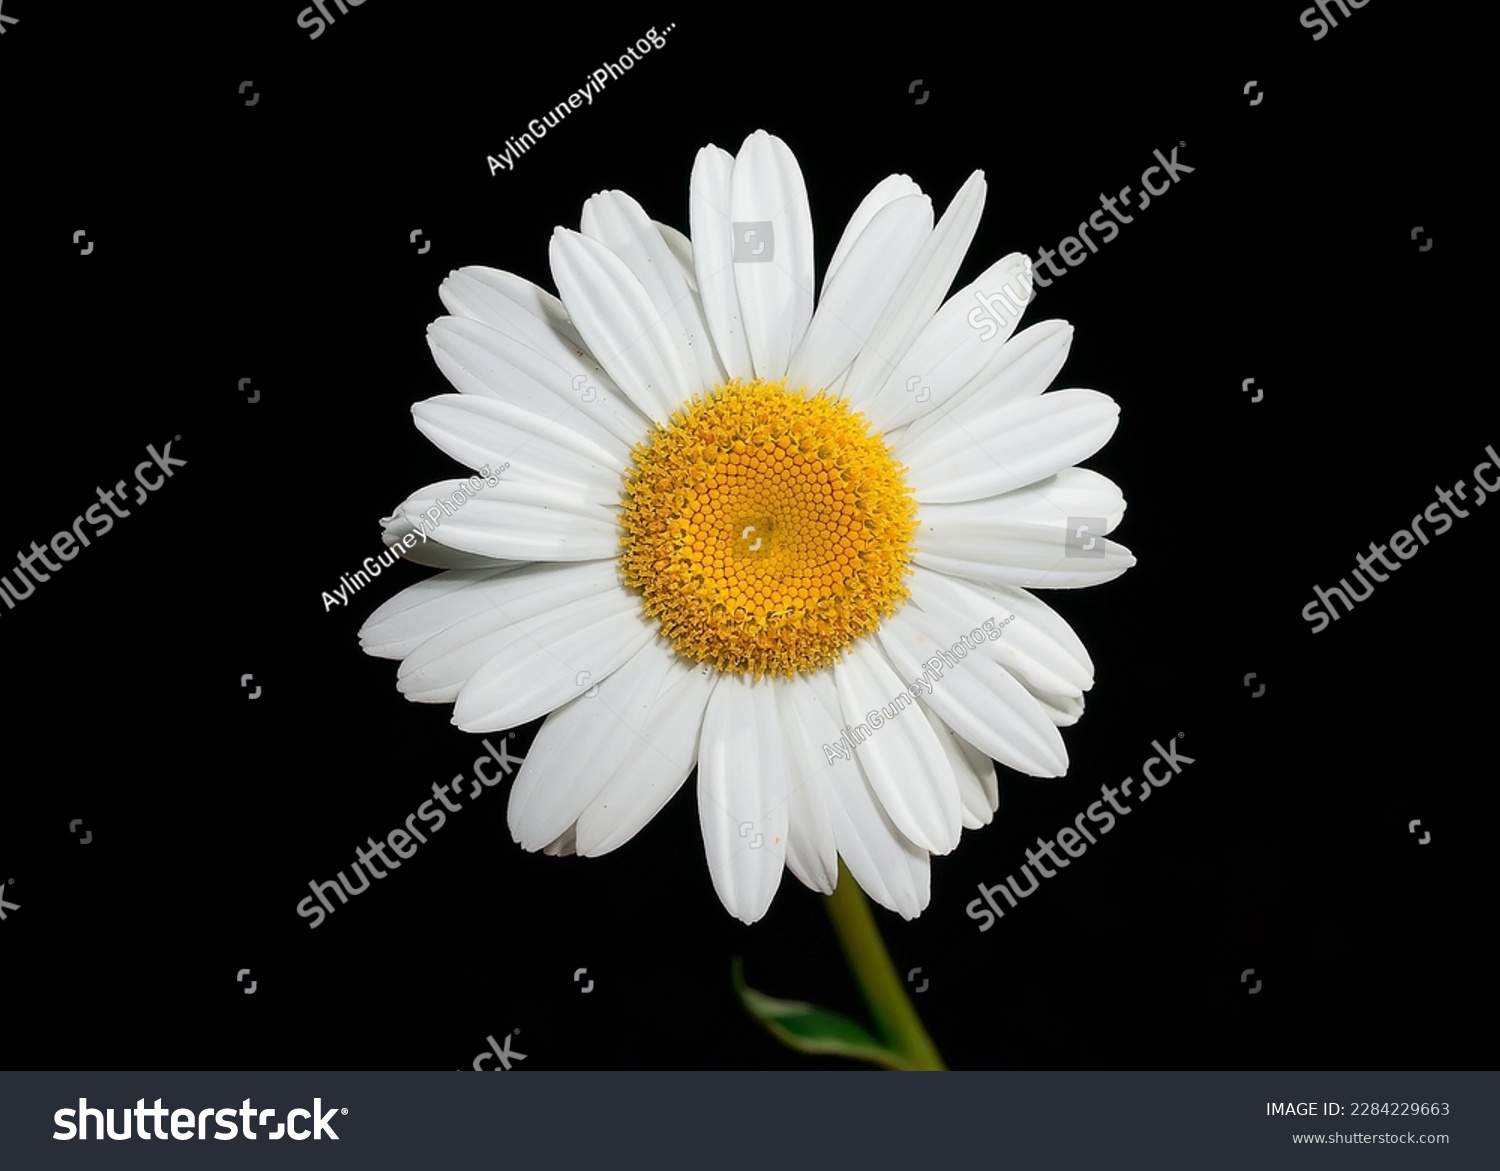 Wild daisy flowers growing on meadow, white chamomiles on green grass background. Oxeye daisy, Leucanthemum vulgare, Daisies, Dox-eye, Common daisy, Dog daisy, Gardening concept. #2284229663